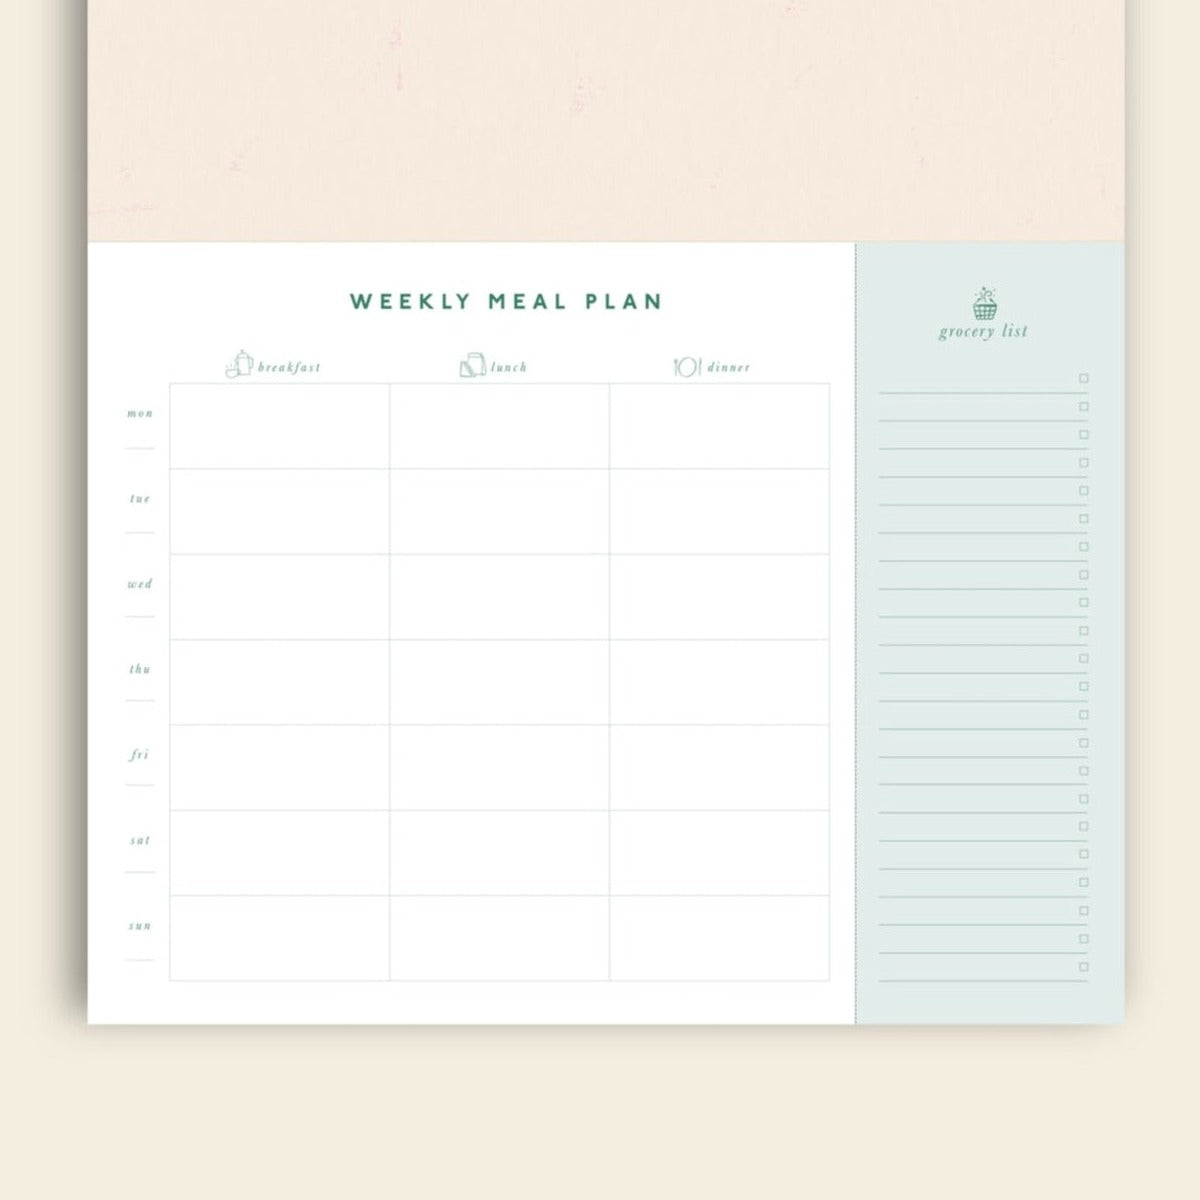 On The Menu Meal Planner